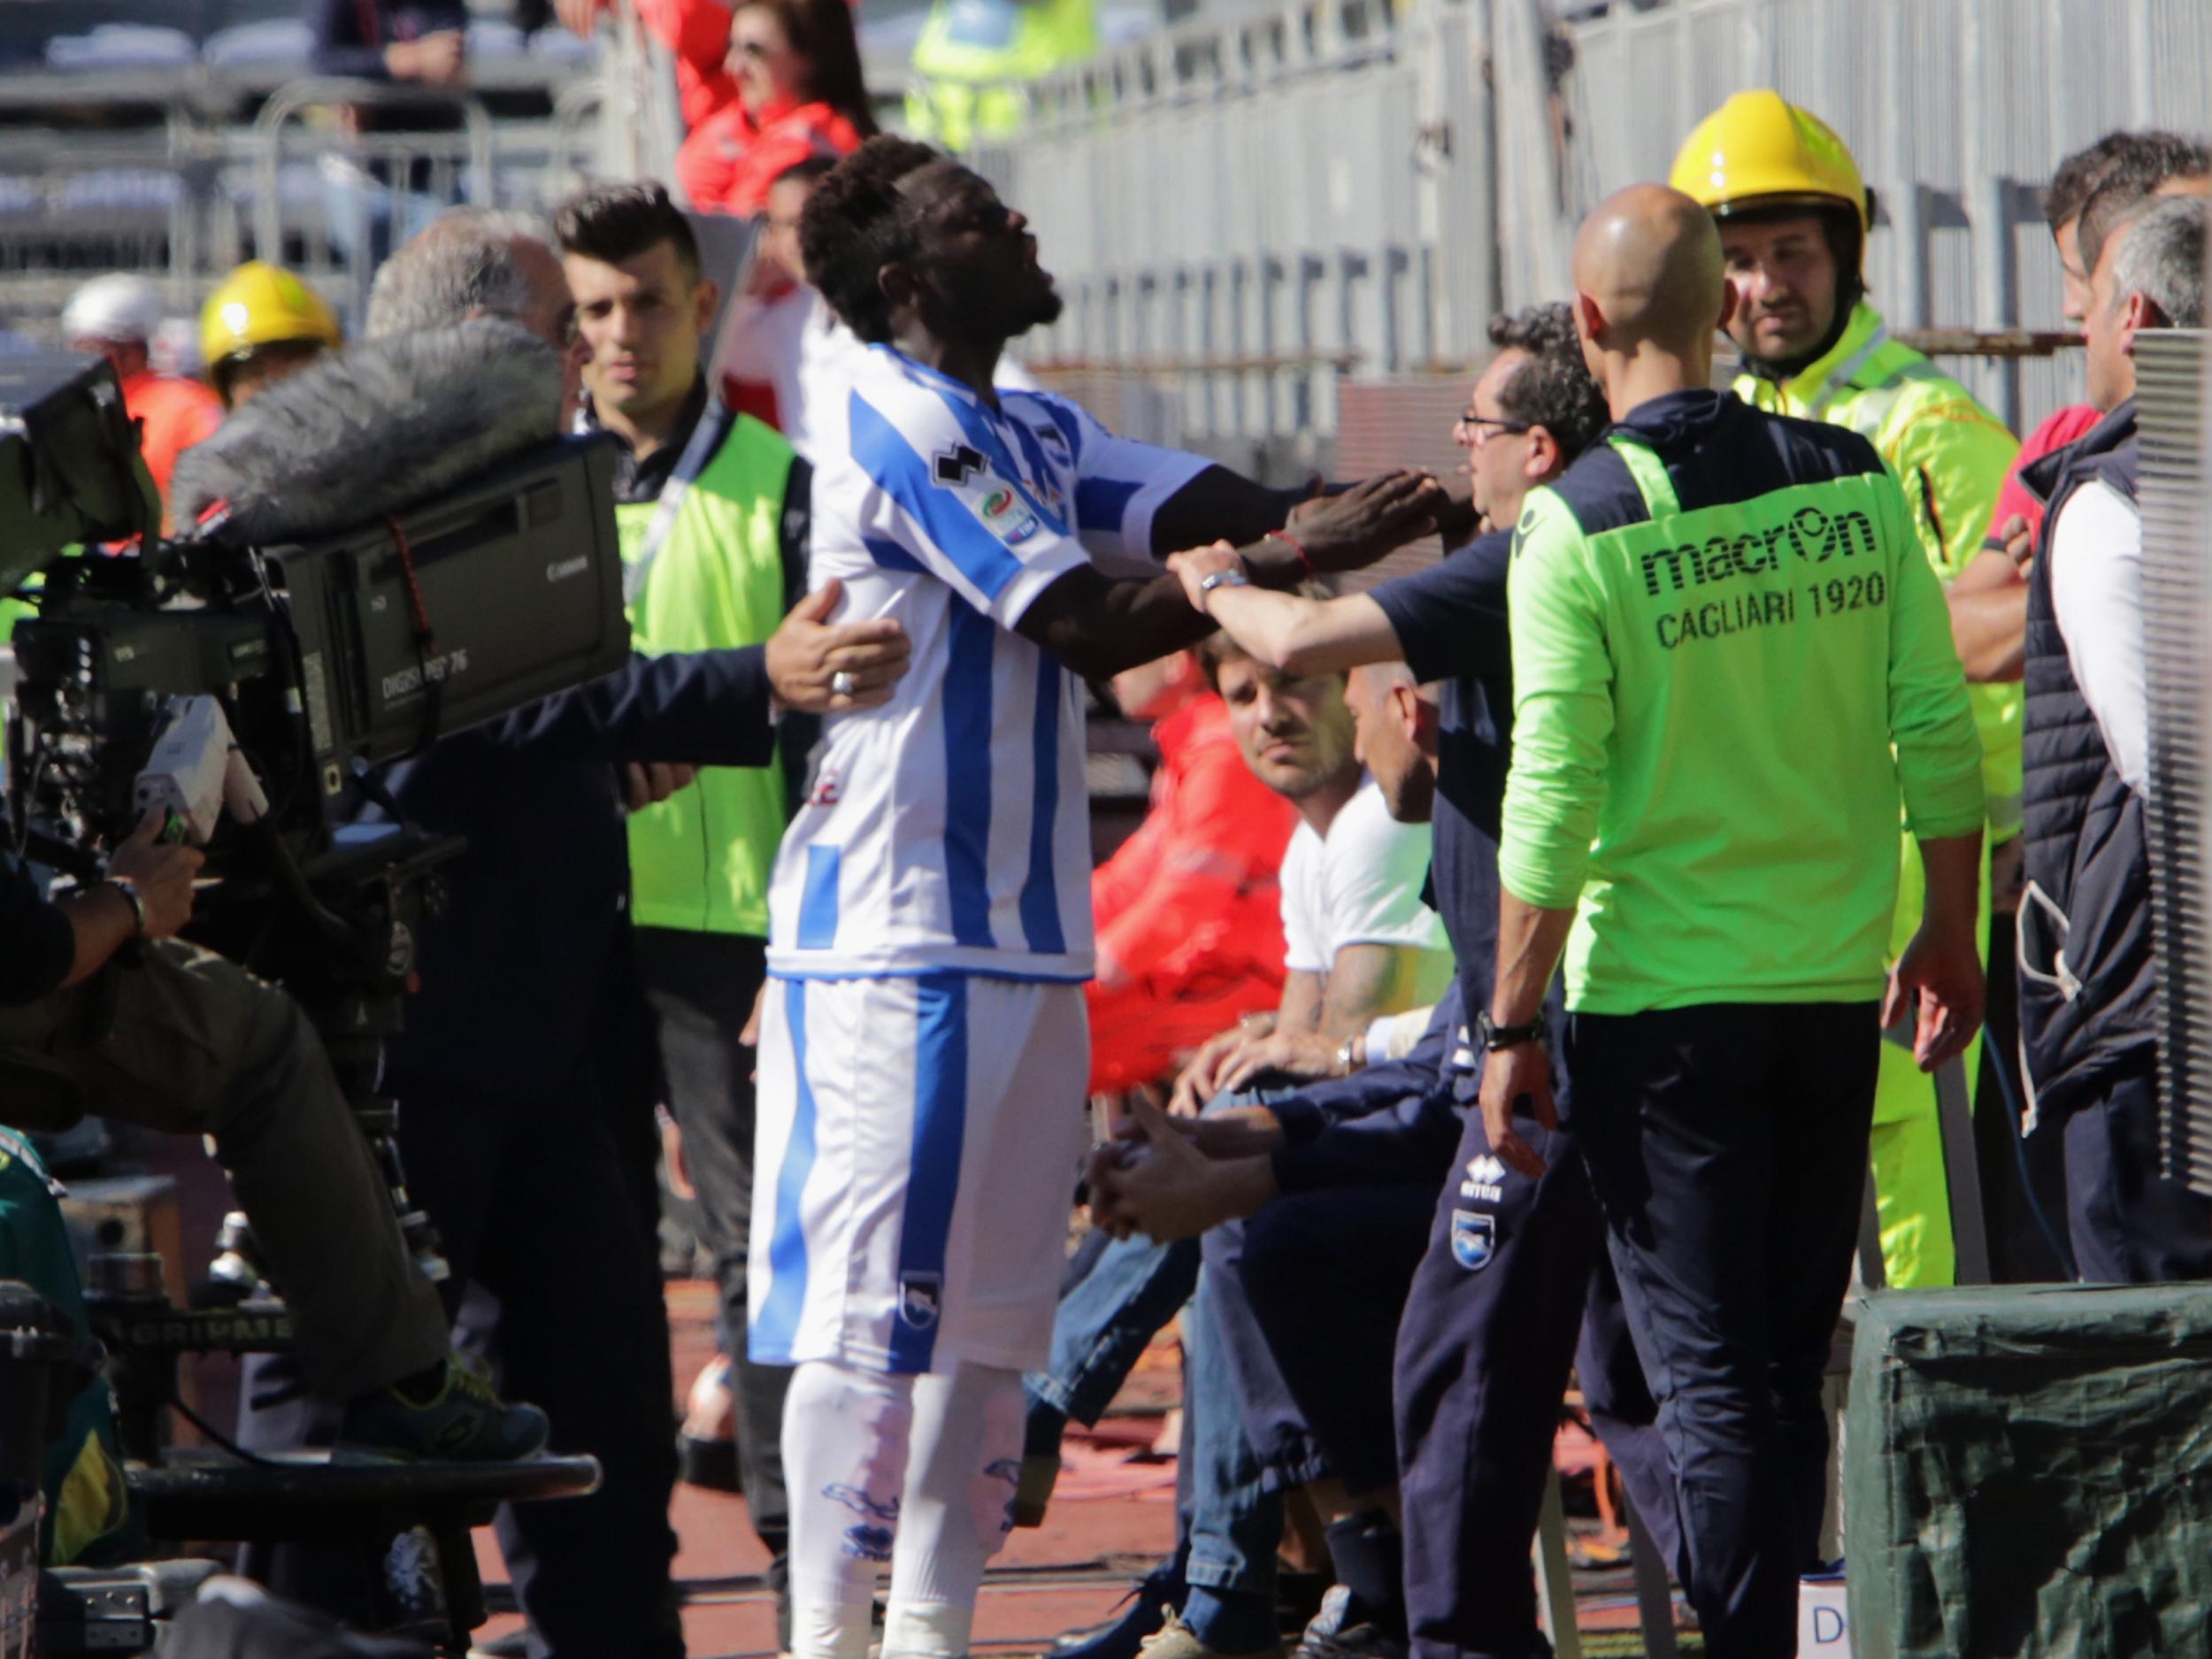 Muntari pleaded with the supporters who were abusing him